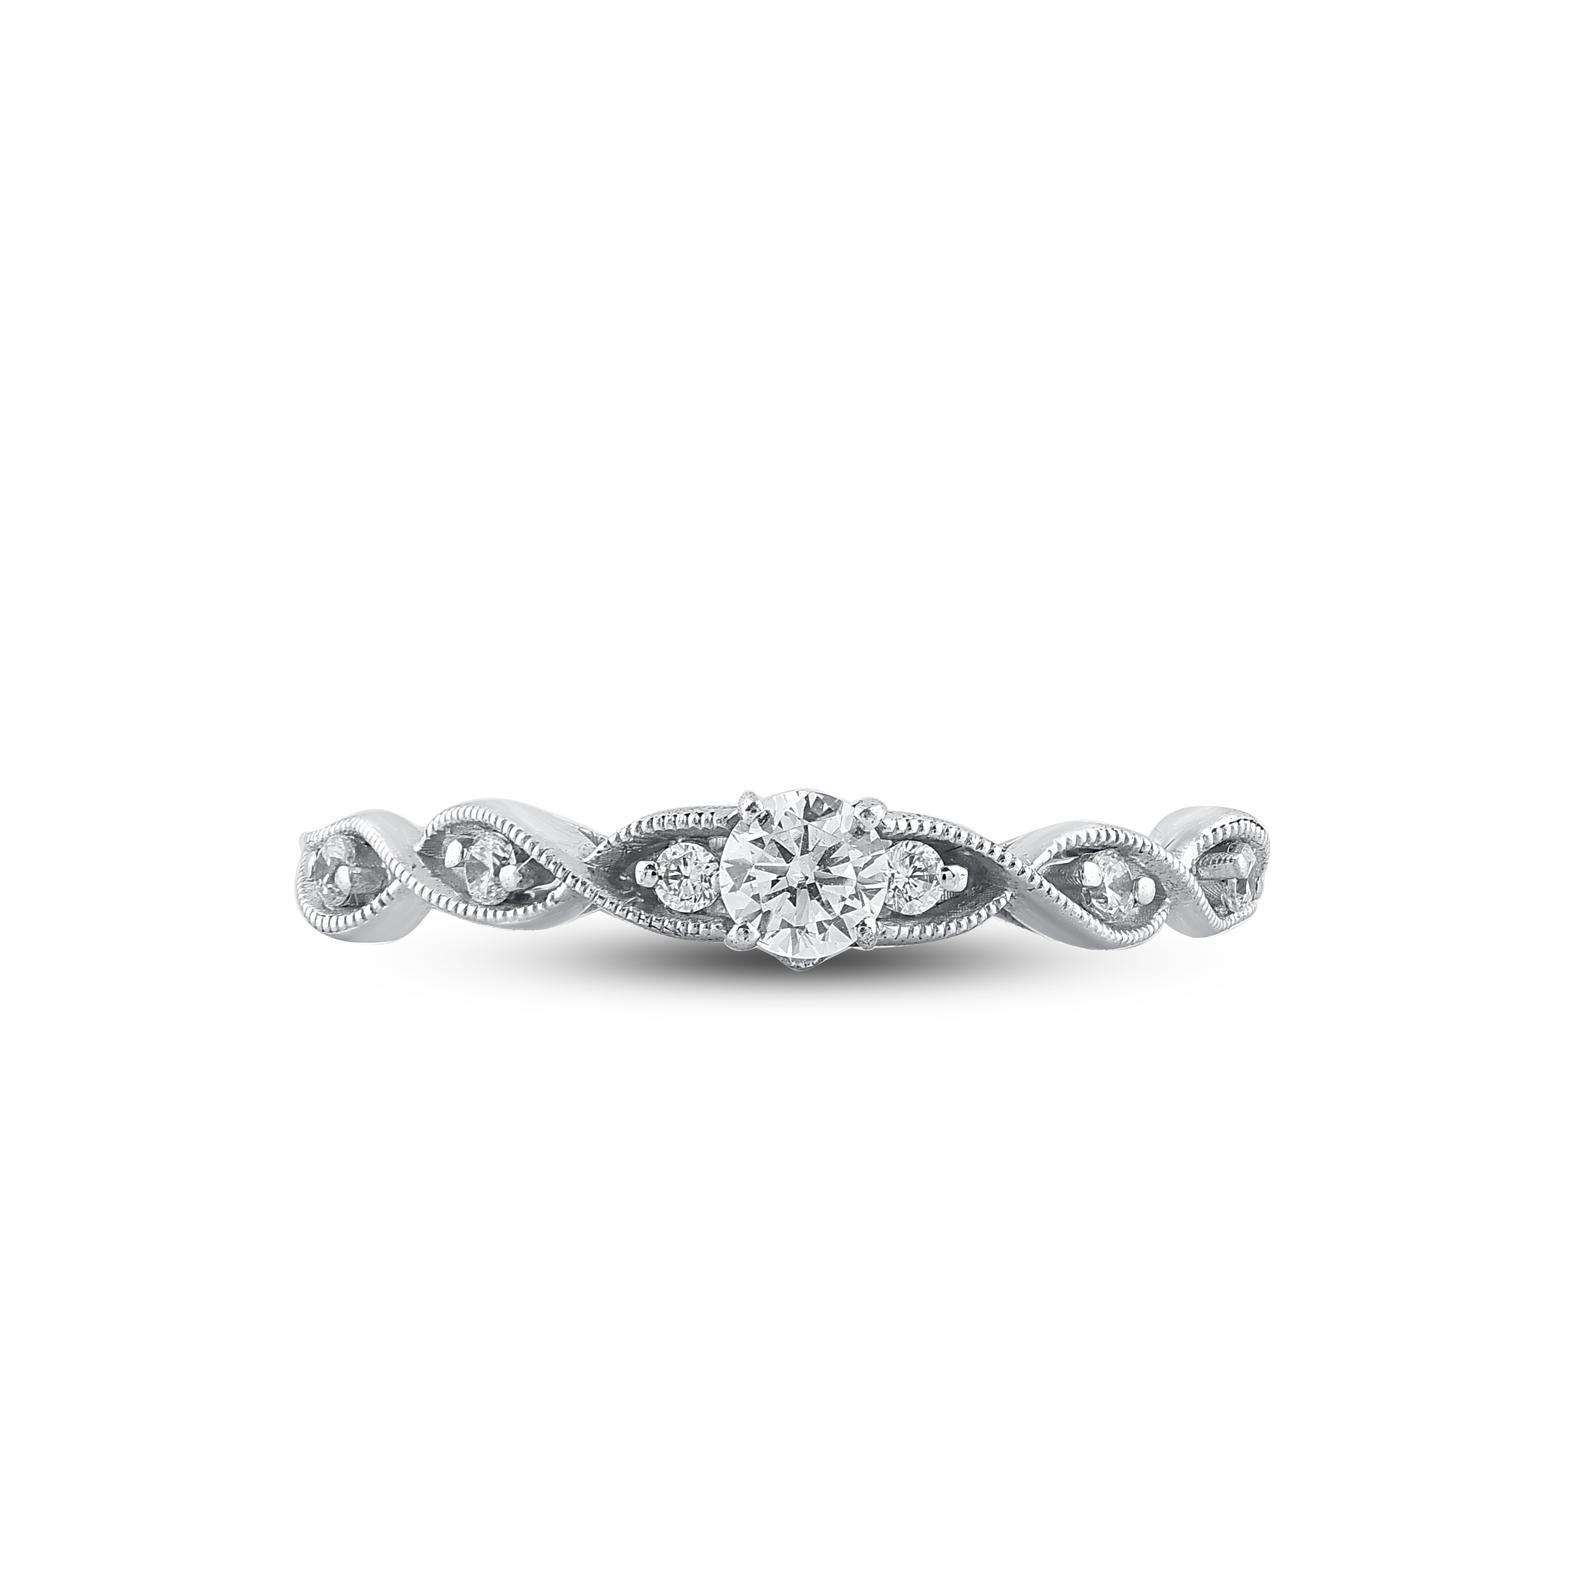 Win her heart with this classic and elegant diamond wedding ring. These diamond ring are studded with 7 brilliant cut round diamonds in prong setting and crafted in 14kt white gold. The white diamonds are graded as H-I color and I2 clarity and a